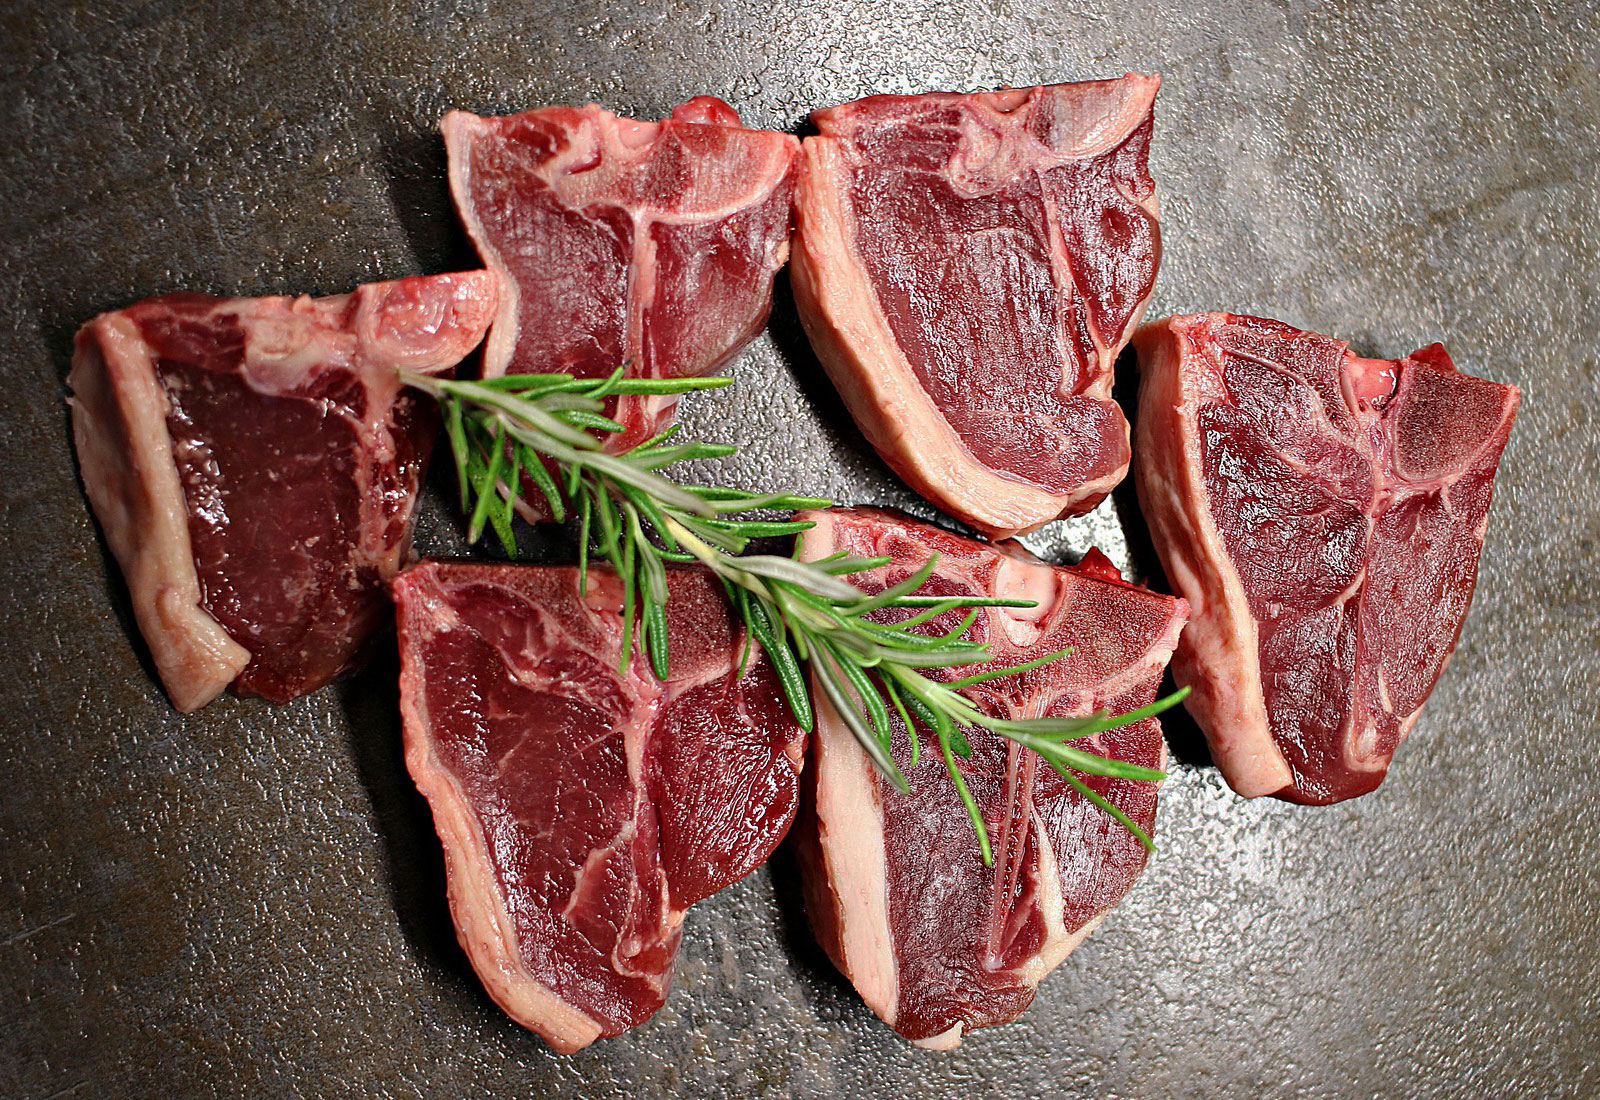 🥩 Only a Master Chef Can Identify 16/23 of These Uncooked Meats Raw Lamb Chops